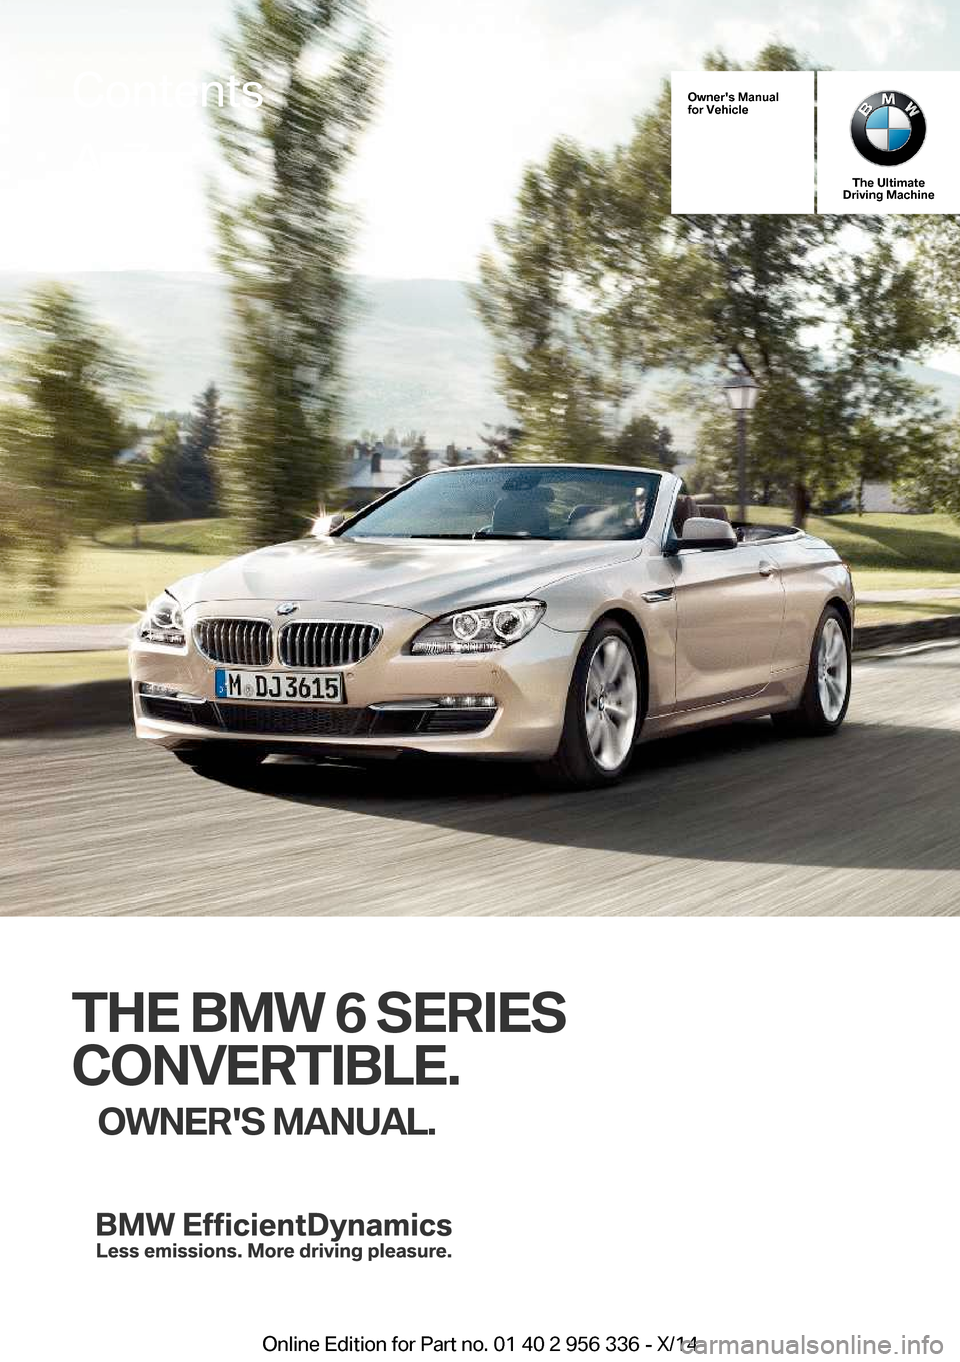 BMW 6 SERIES CONVERTIBLE 2014 F12 Owners Manual Owners Manual
for Vehicle
The Ultimate
Driving Machine
THE BMW 6 SERIES
CONVERTIBLE. OWNERS MANUAL.
ContentsA-Z
Online Edition for Part no. 01 40 2 956 336 - X/14   